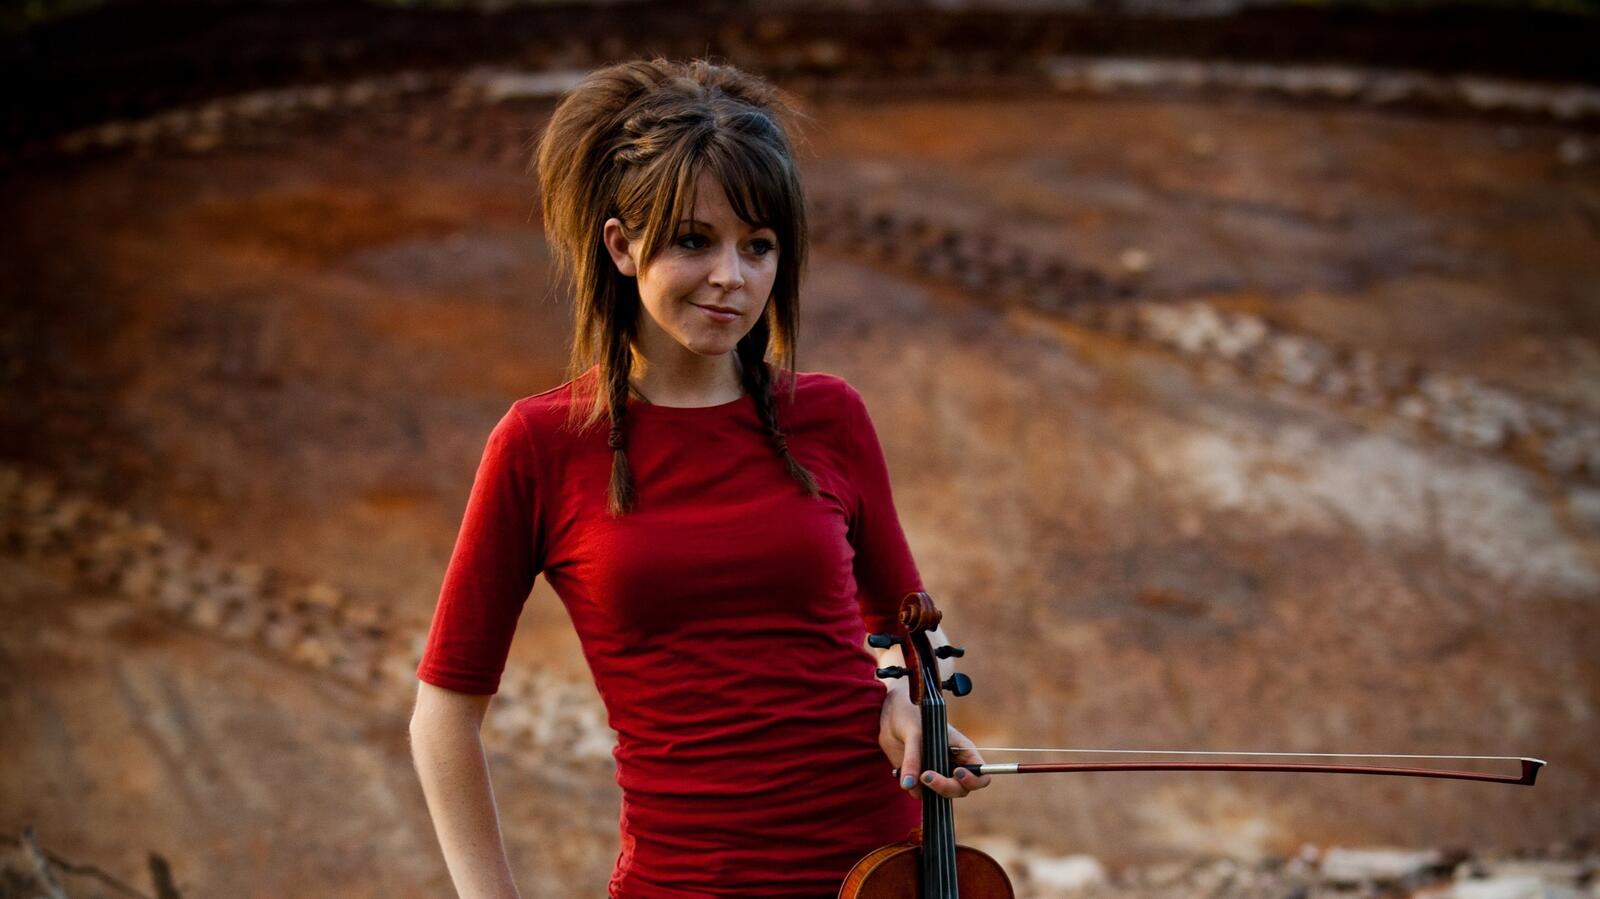 Wallpapers Lindsey Stirling hairstyle violin on the desktop